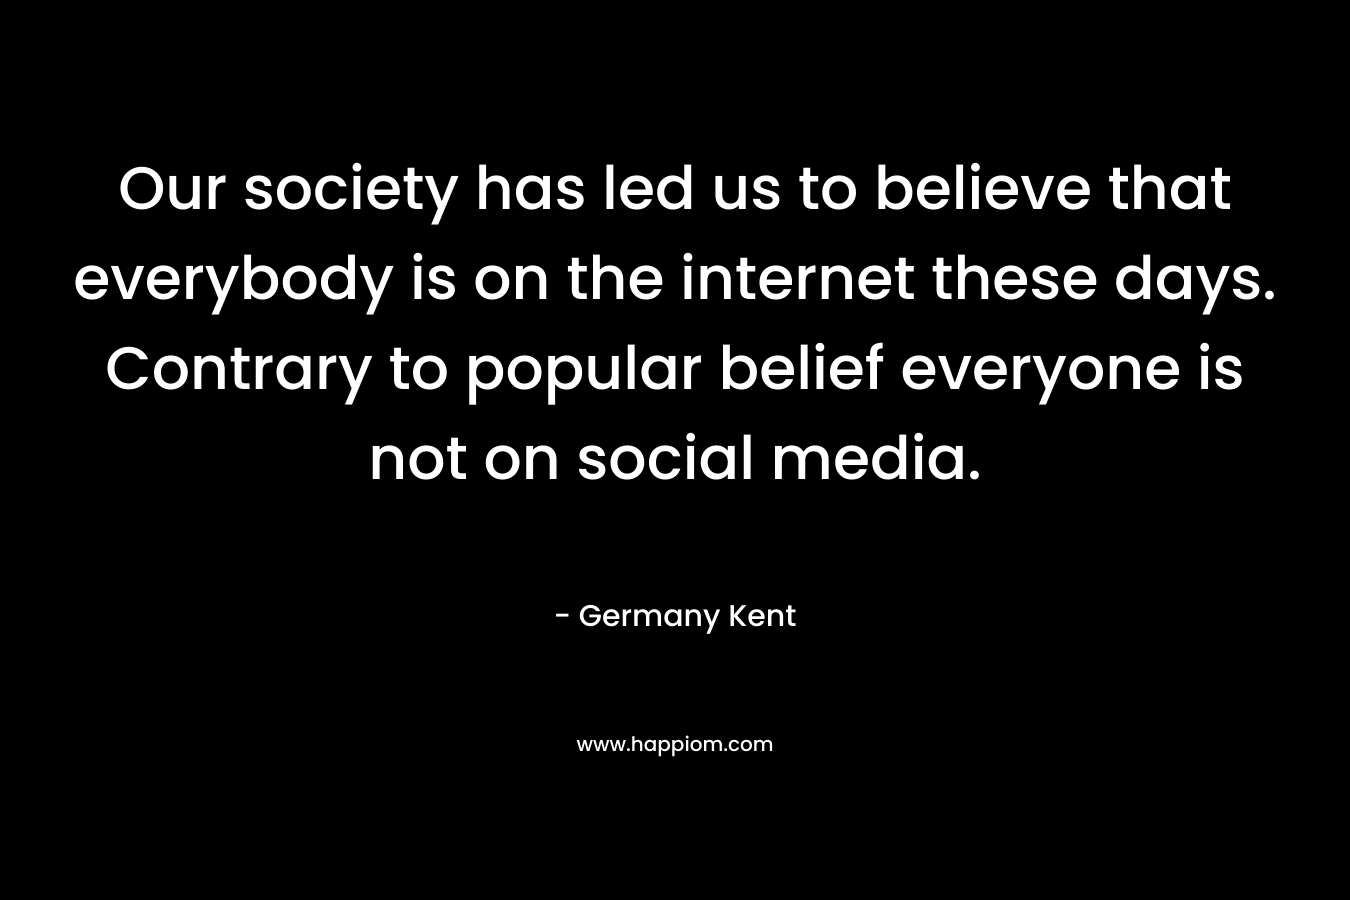 Our society has led us to believe that everybody is on the internet these days. Contrary to popular belief everyone is not on social media.